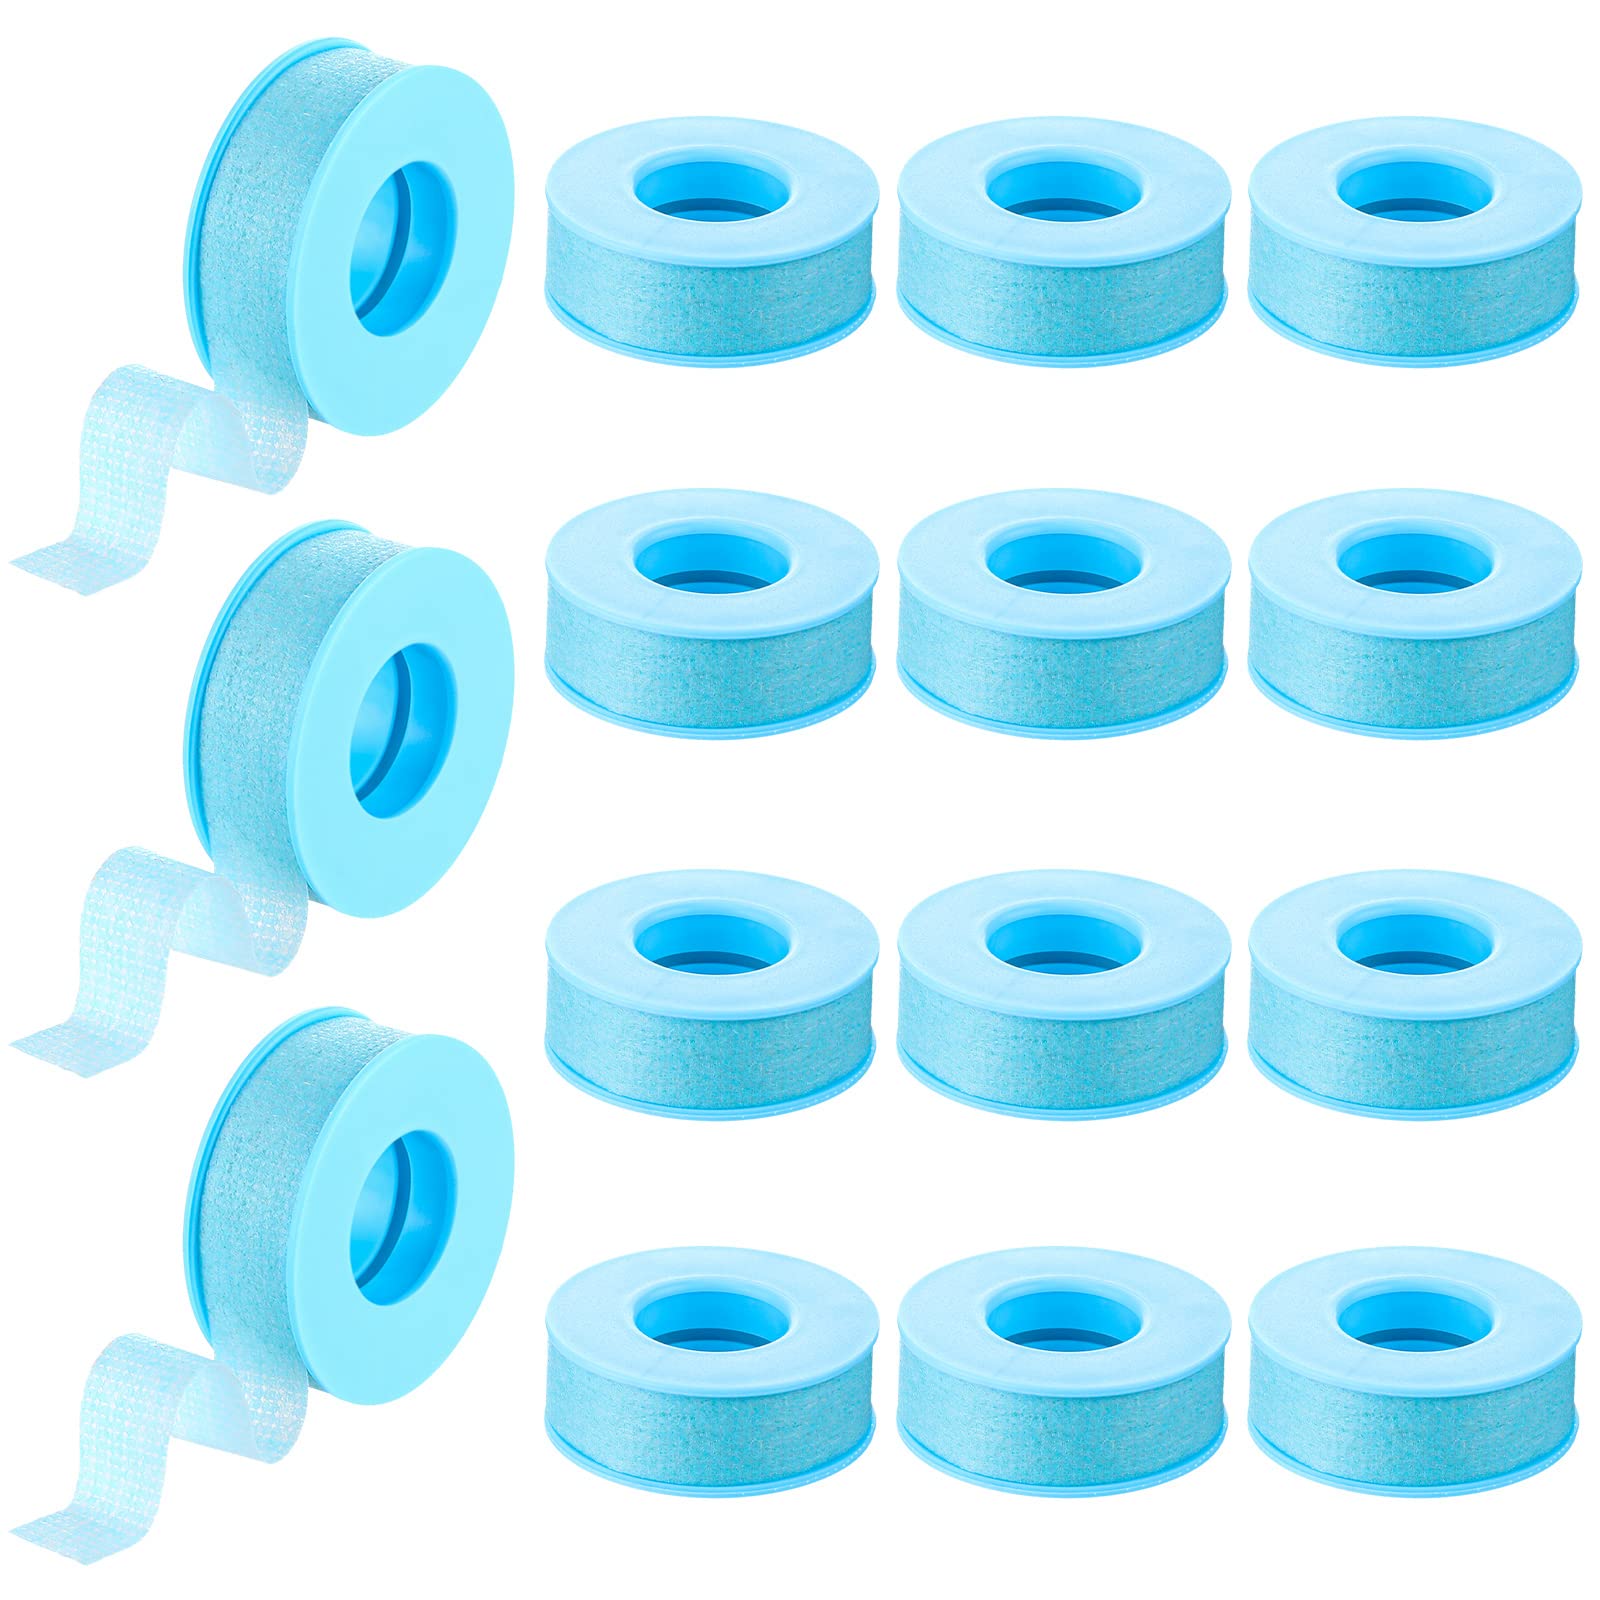 Nuanchu 12 Rolls Silicone Tape Bulk Reusable Adhesive Silicone